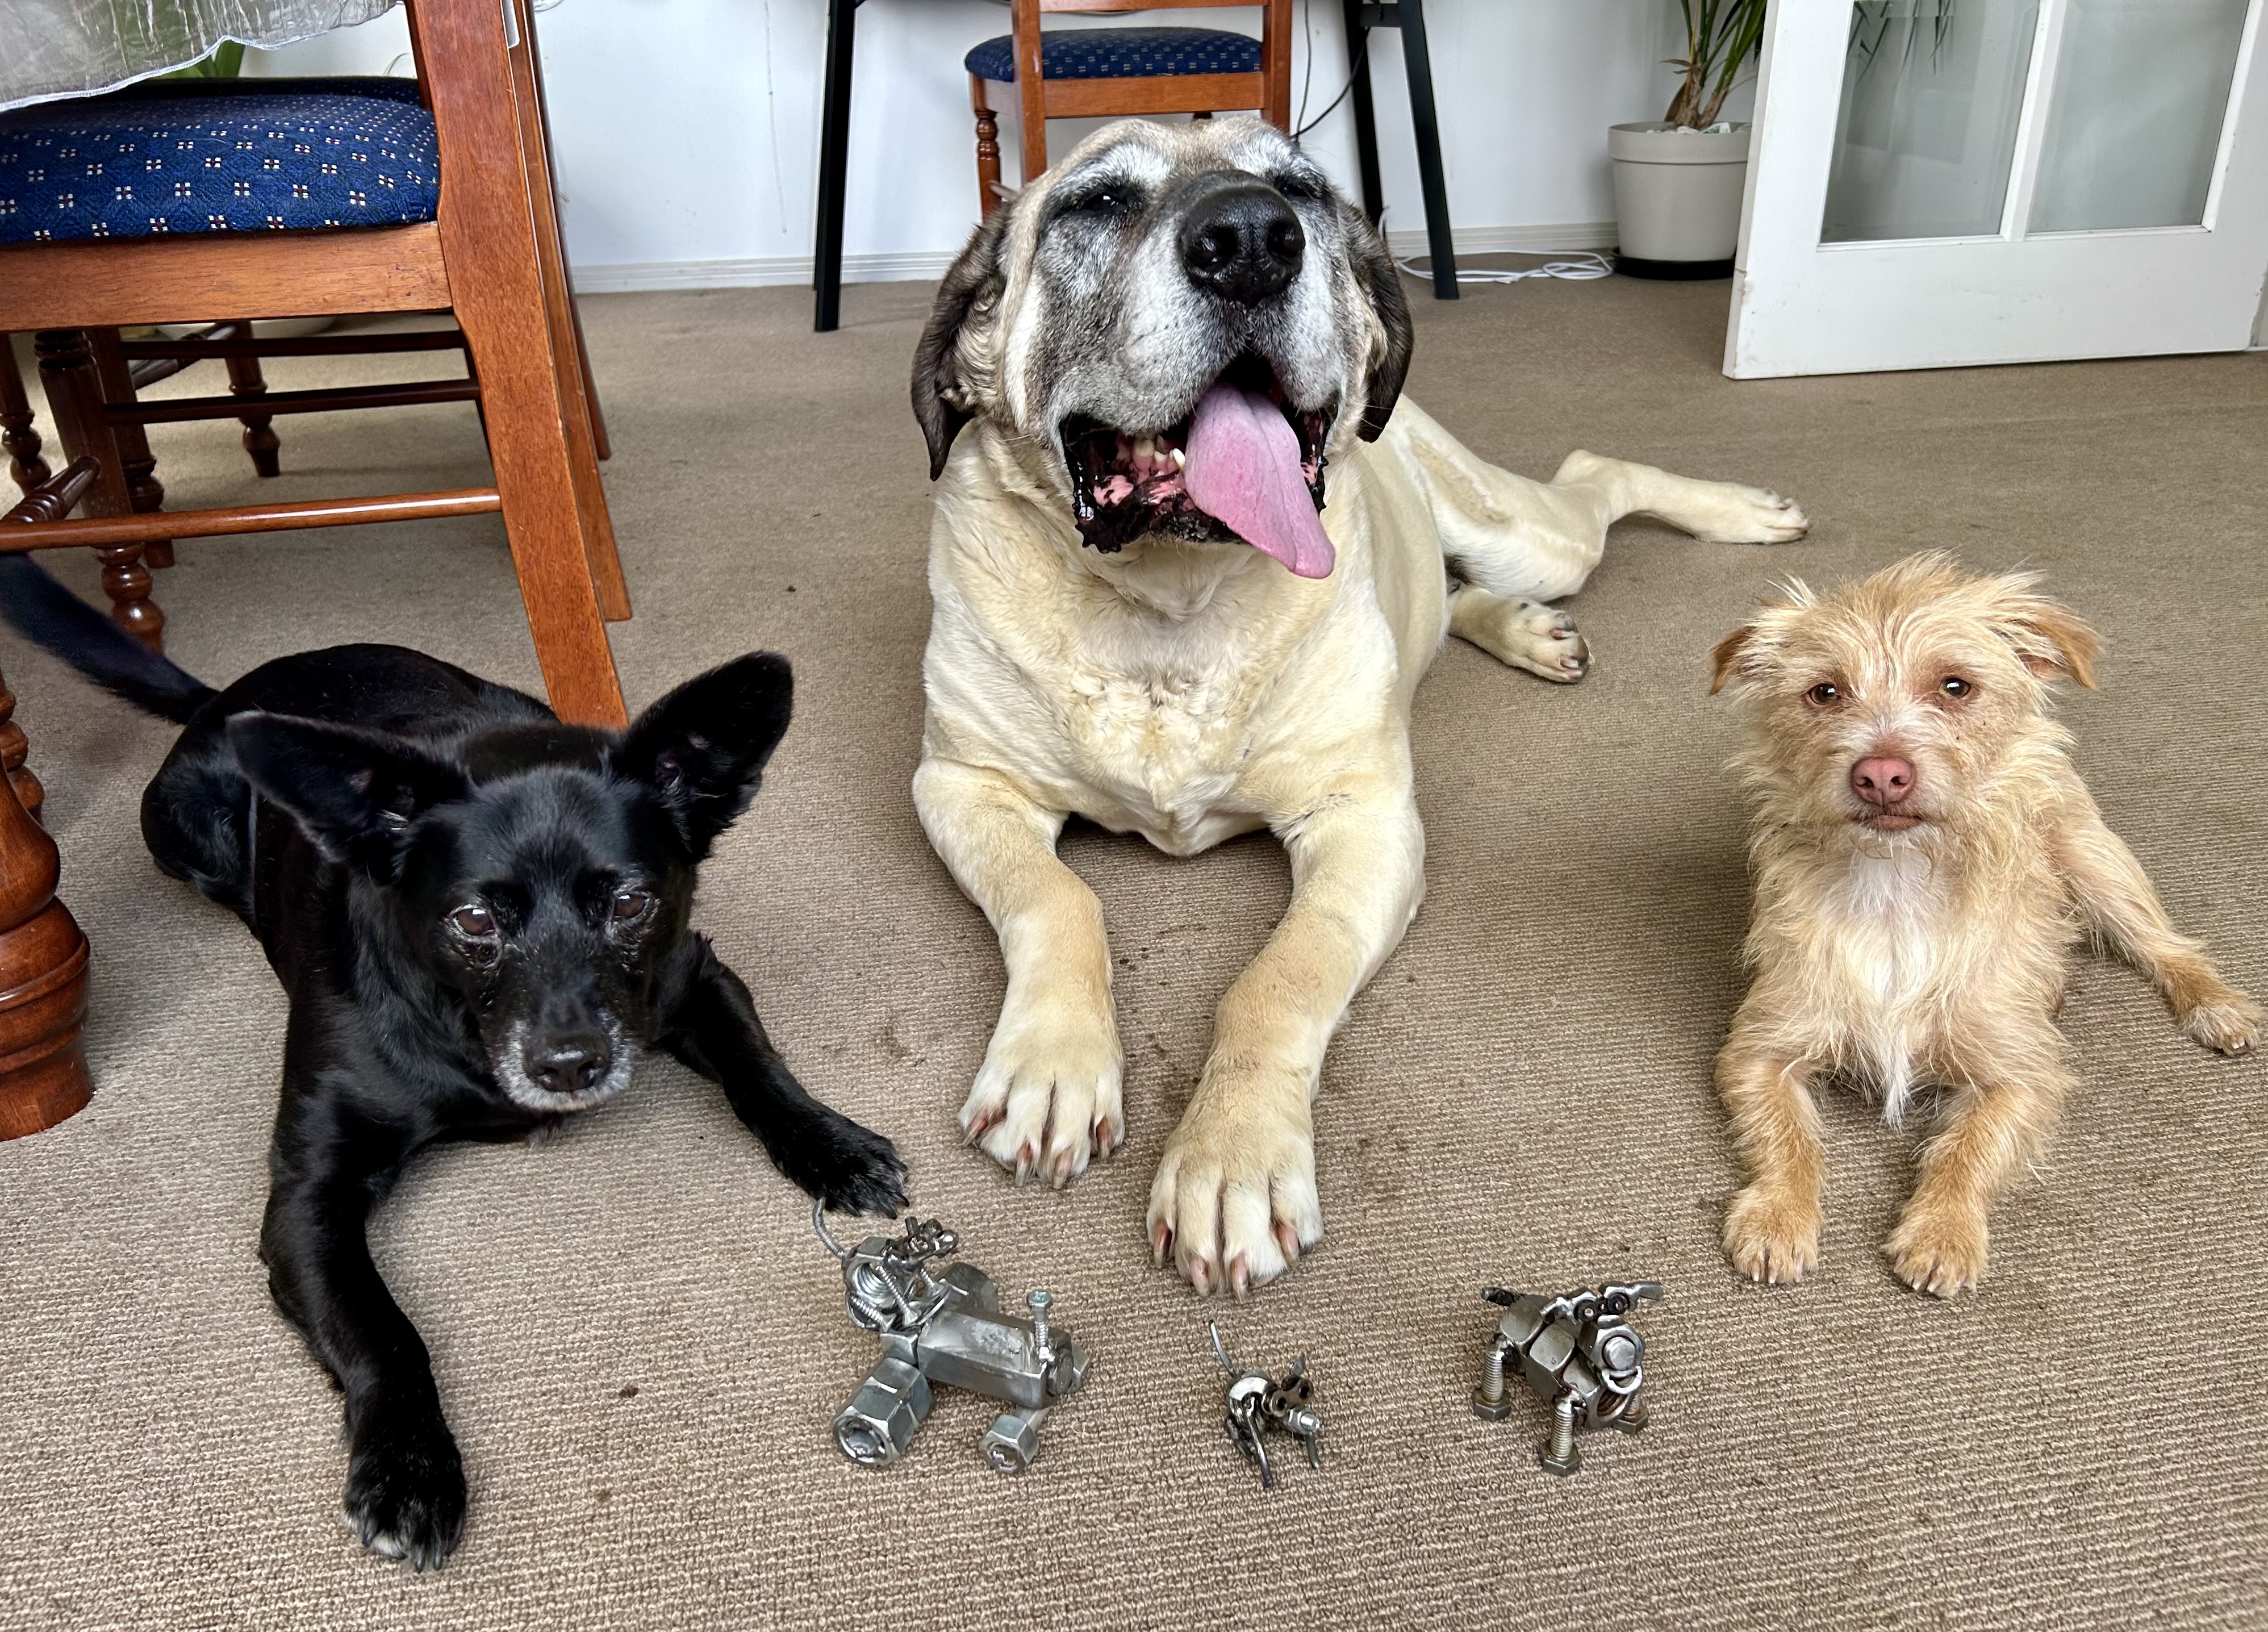 Three well trained and satisfied dogs.